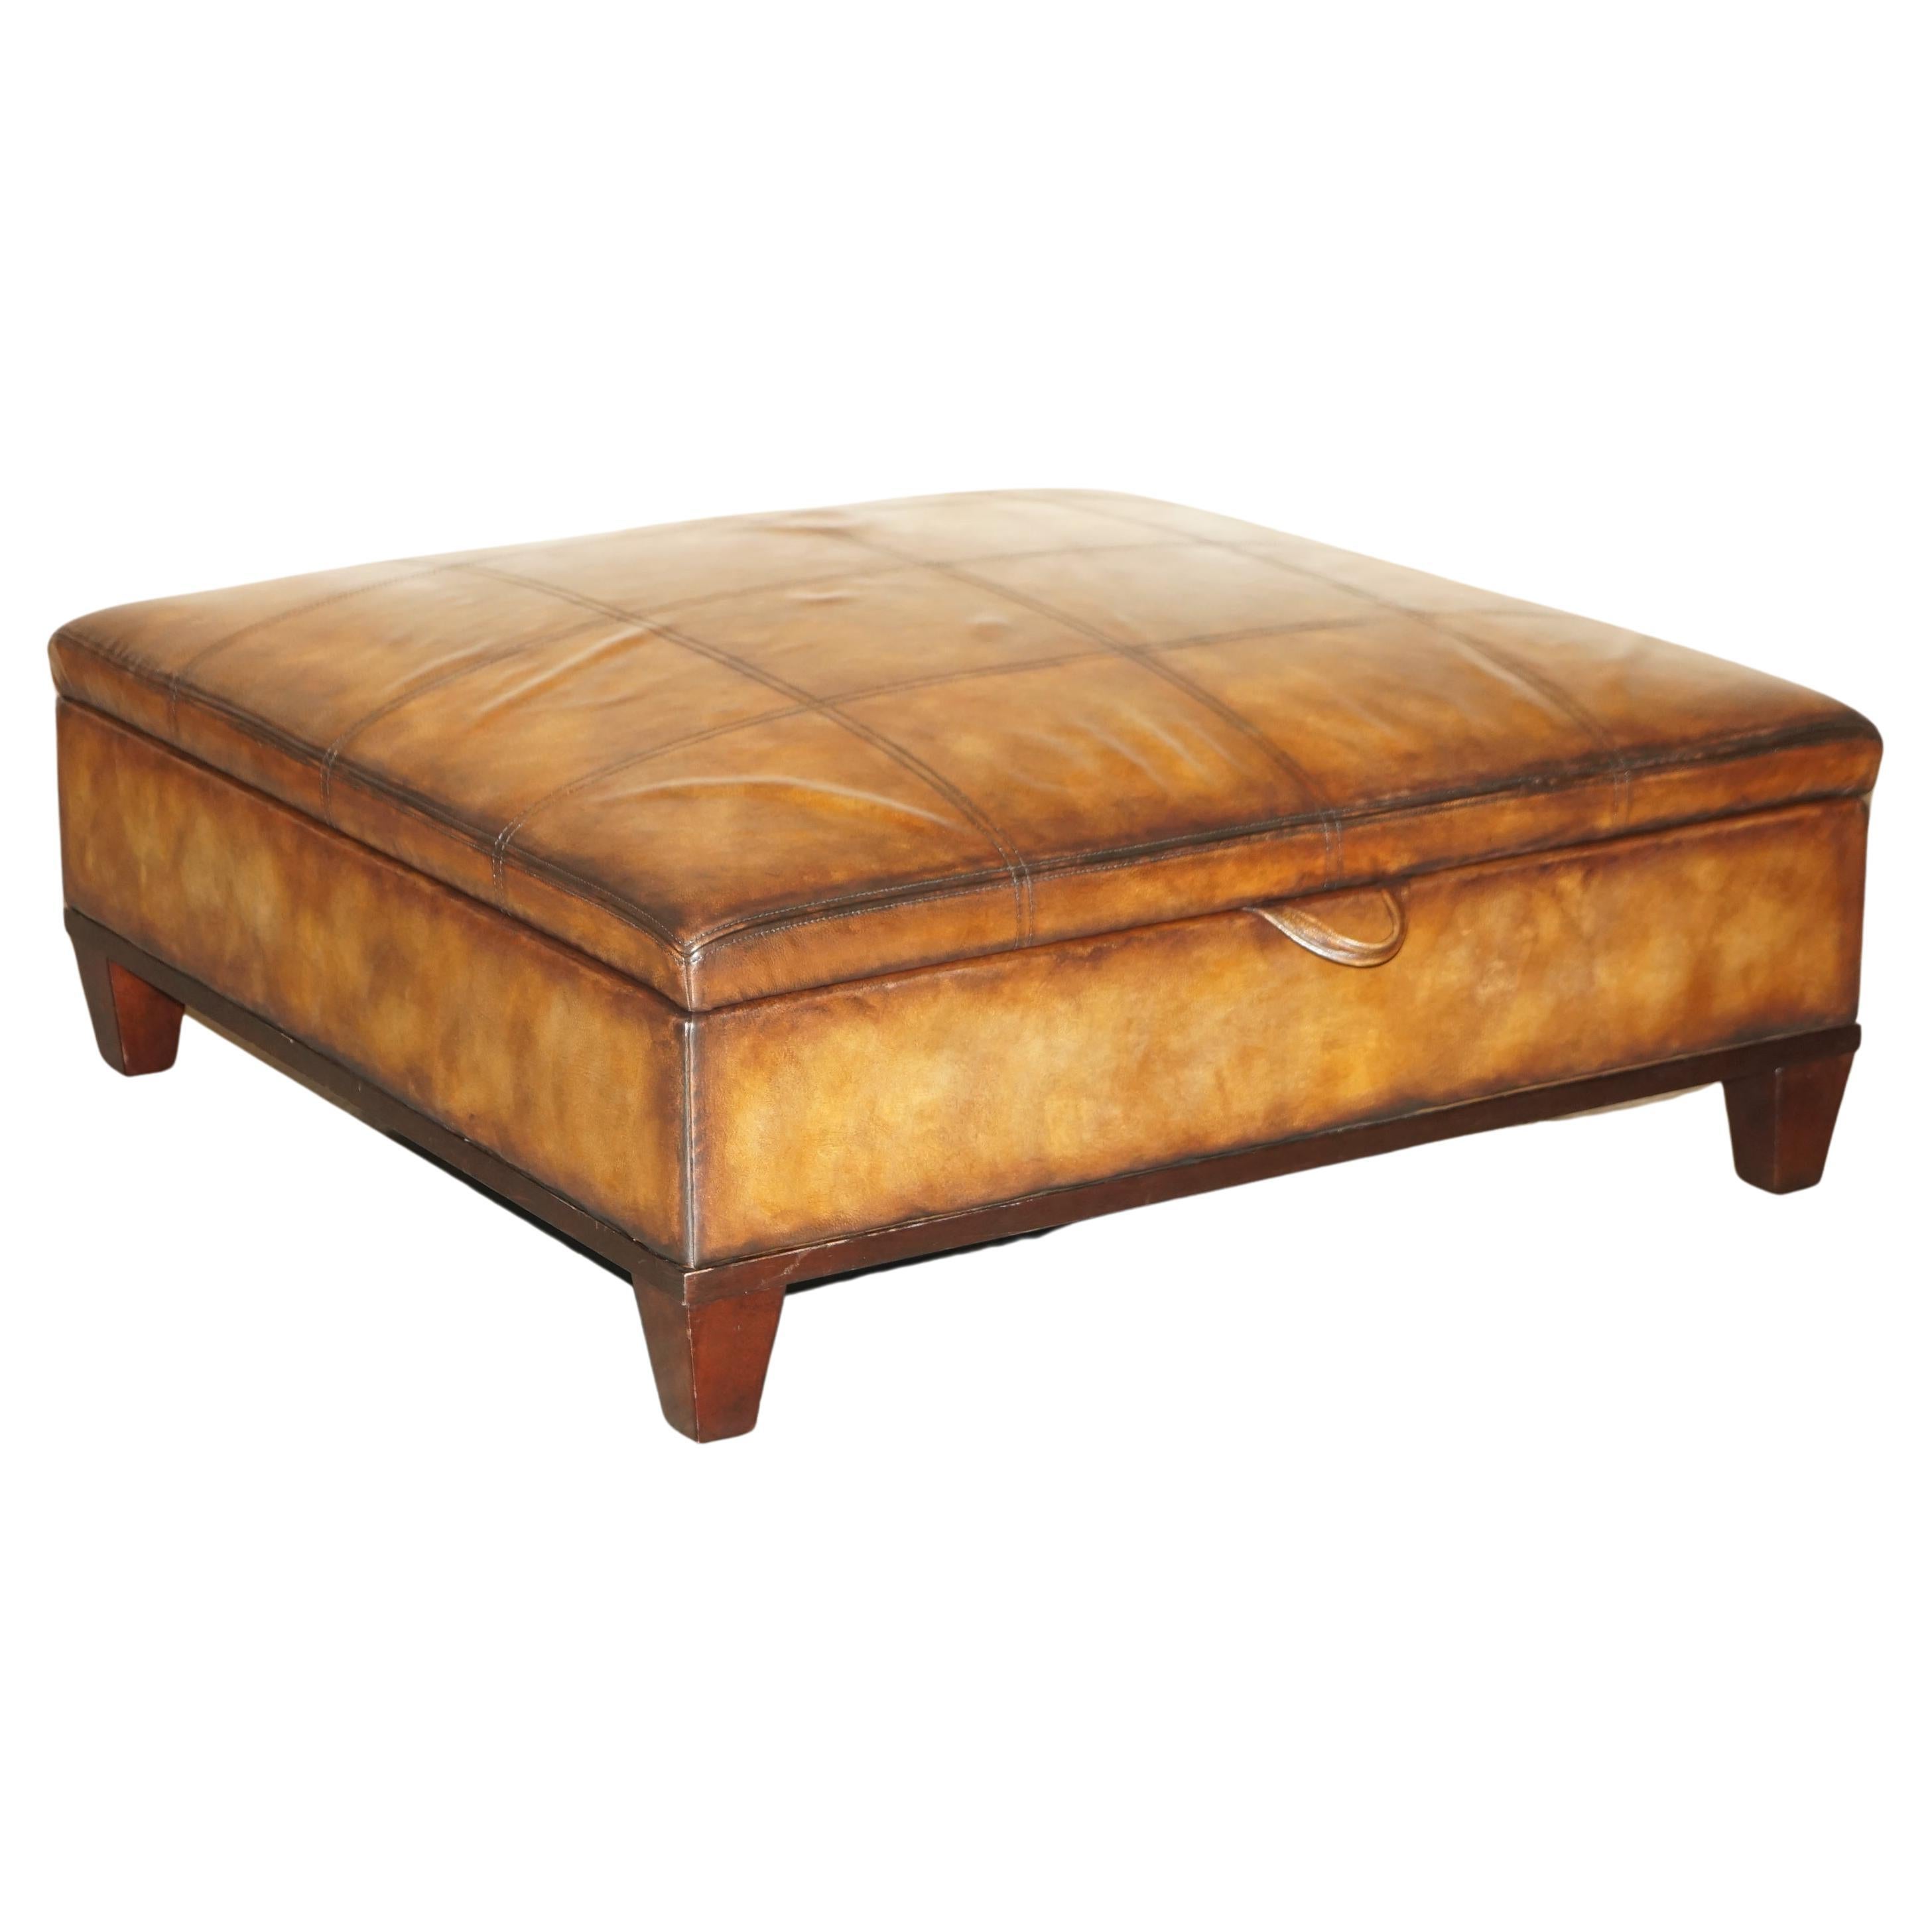 George Smith Extra Large Restored Hand Dyed Brown Leather Ottoman Footstool